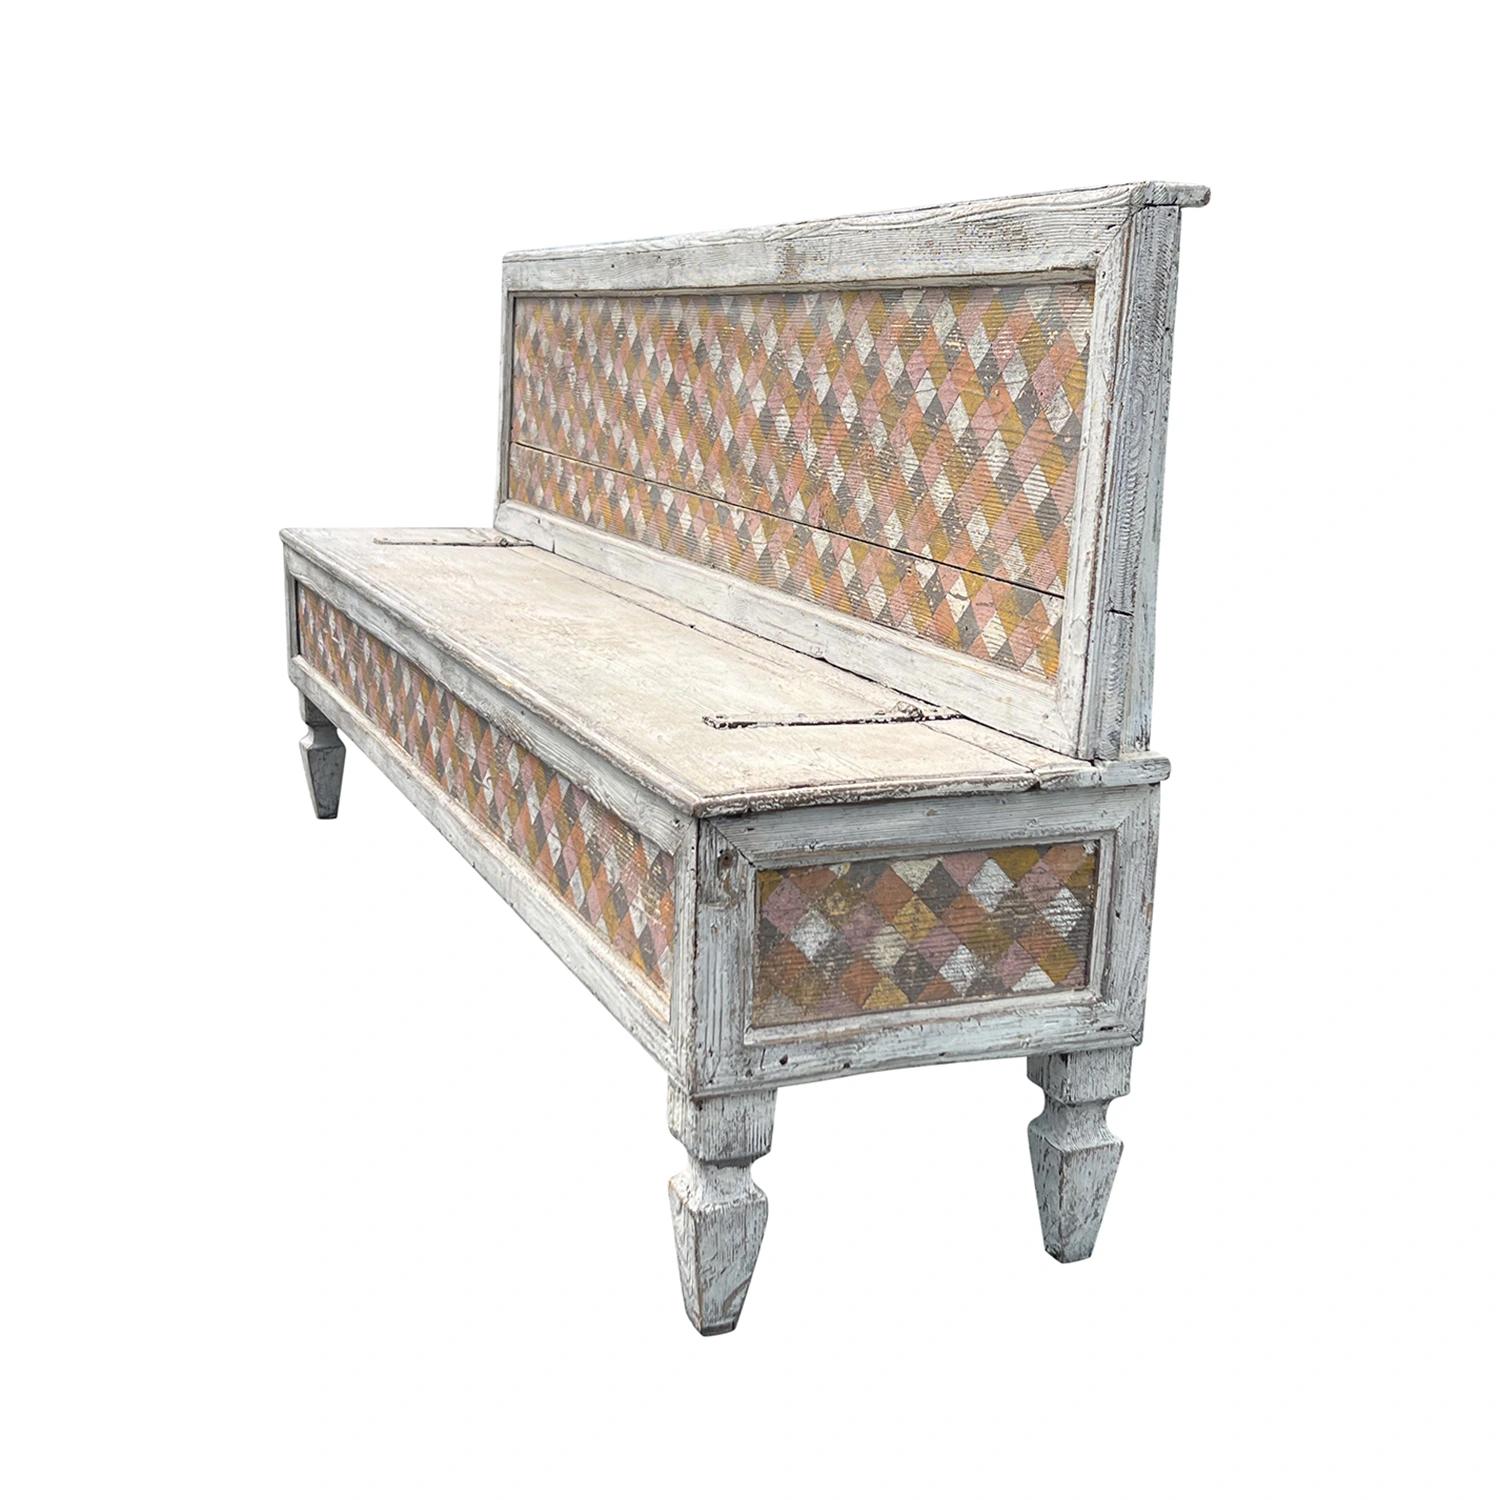 18th Century Italian Arte Povera Pinewood Bench, Antique Seating Furniture In Good Condition For Sale In West Palm Beach, FL